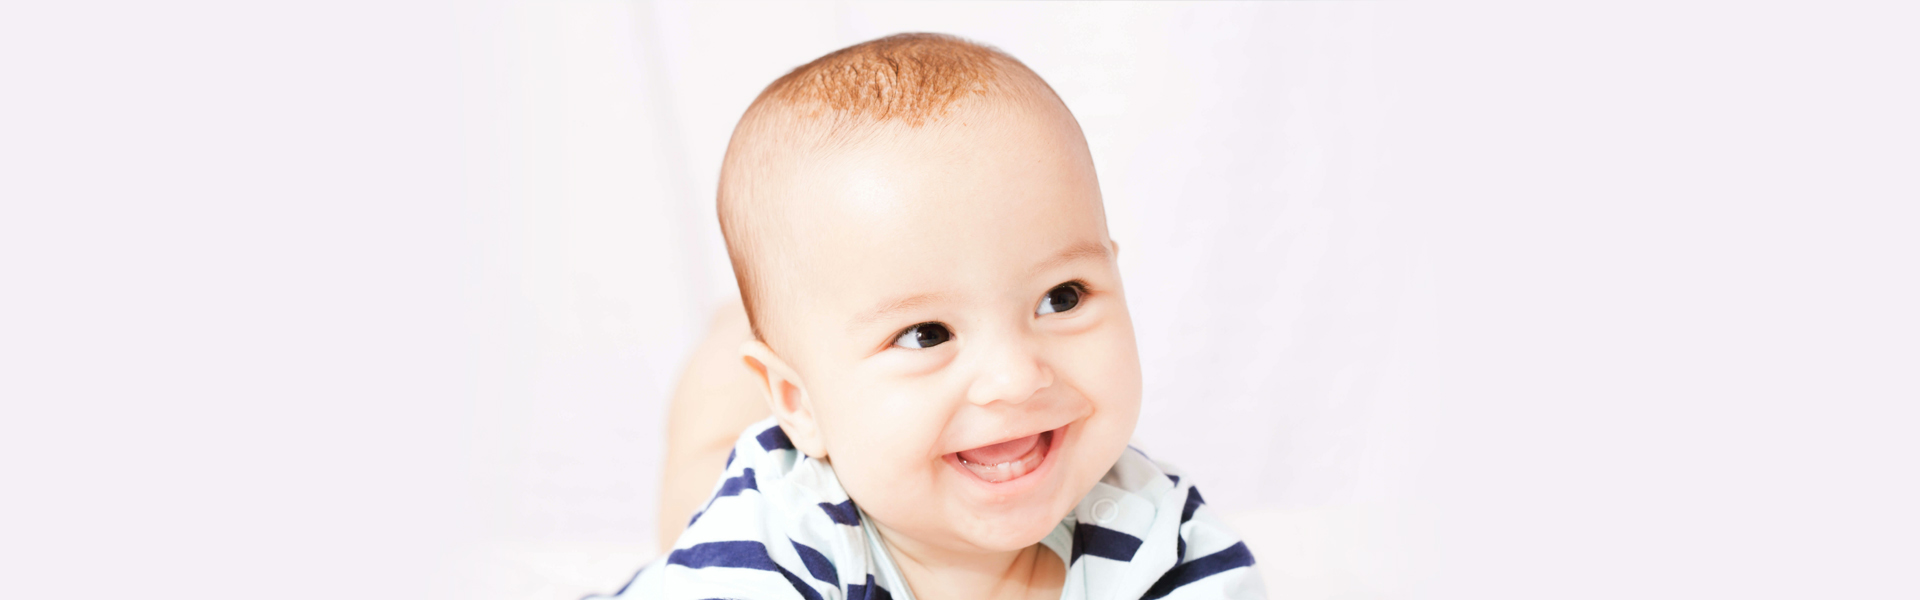 5 Things Every Parent Needs to Know About Baby Teeth